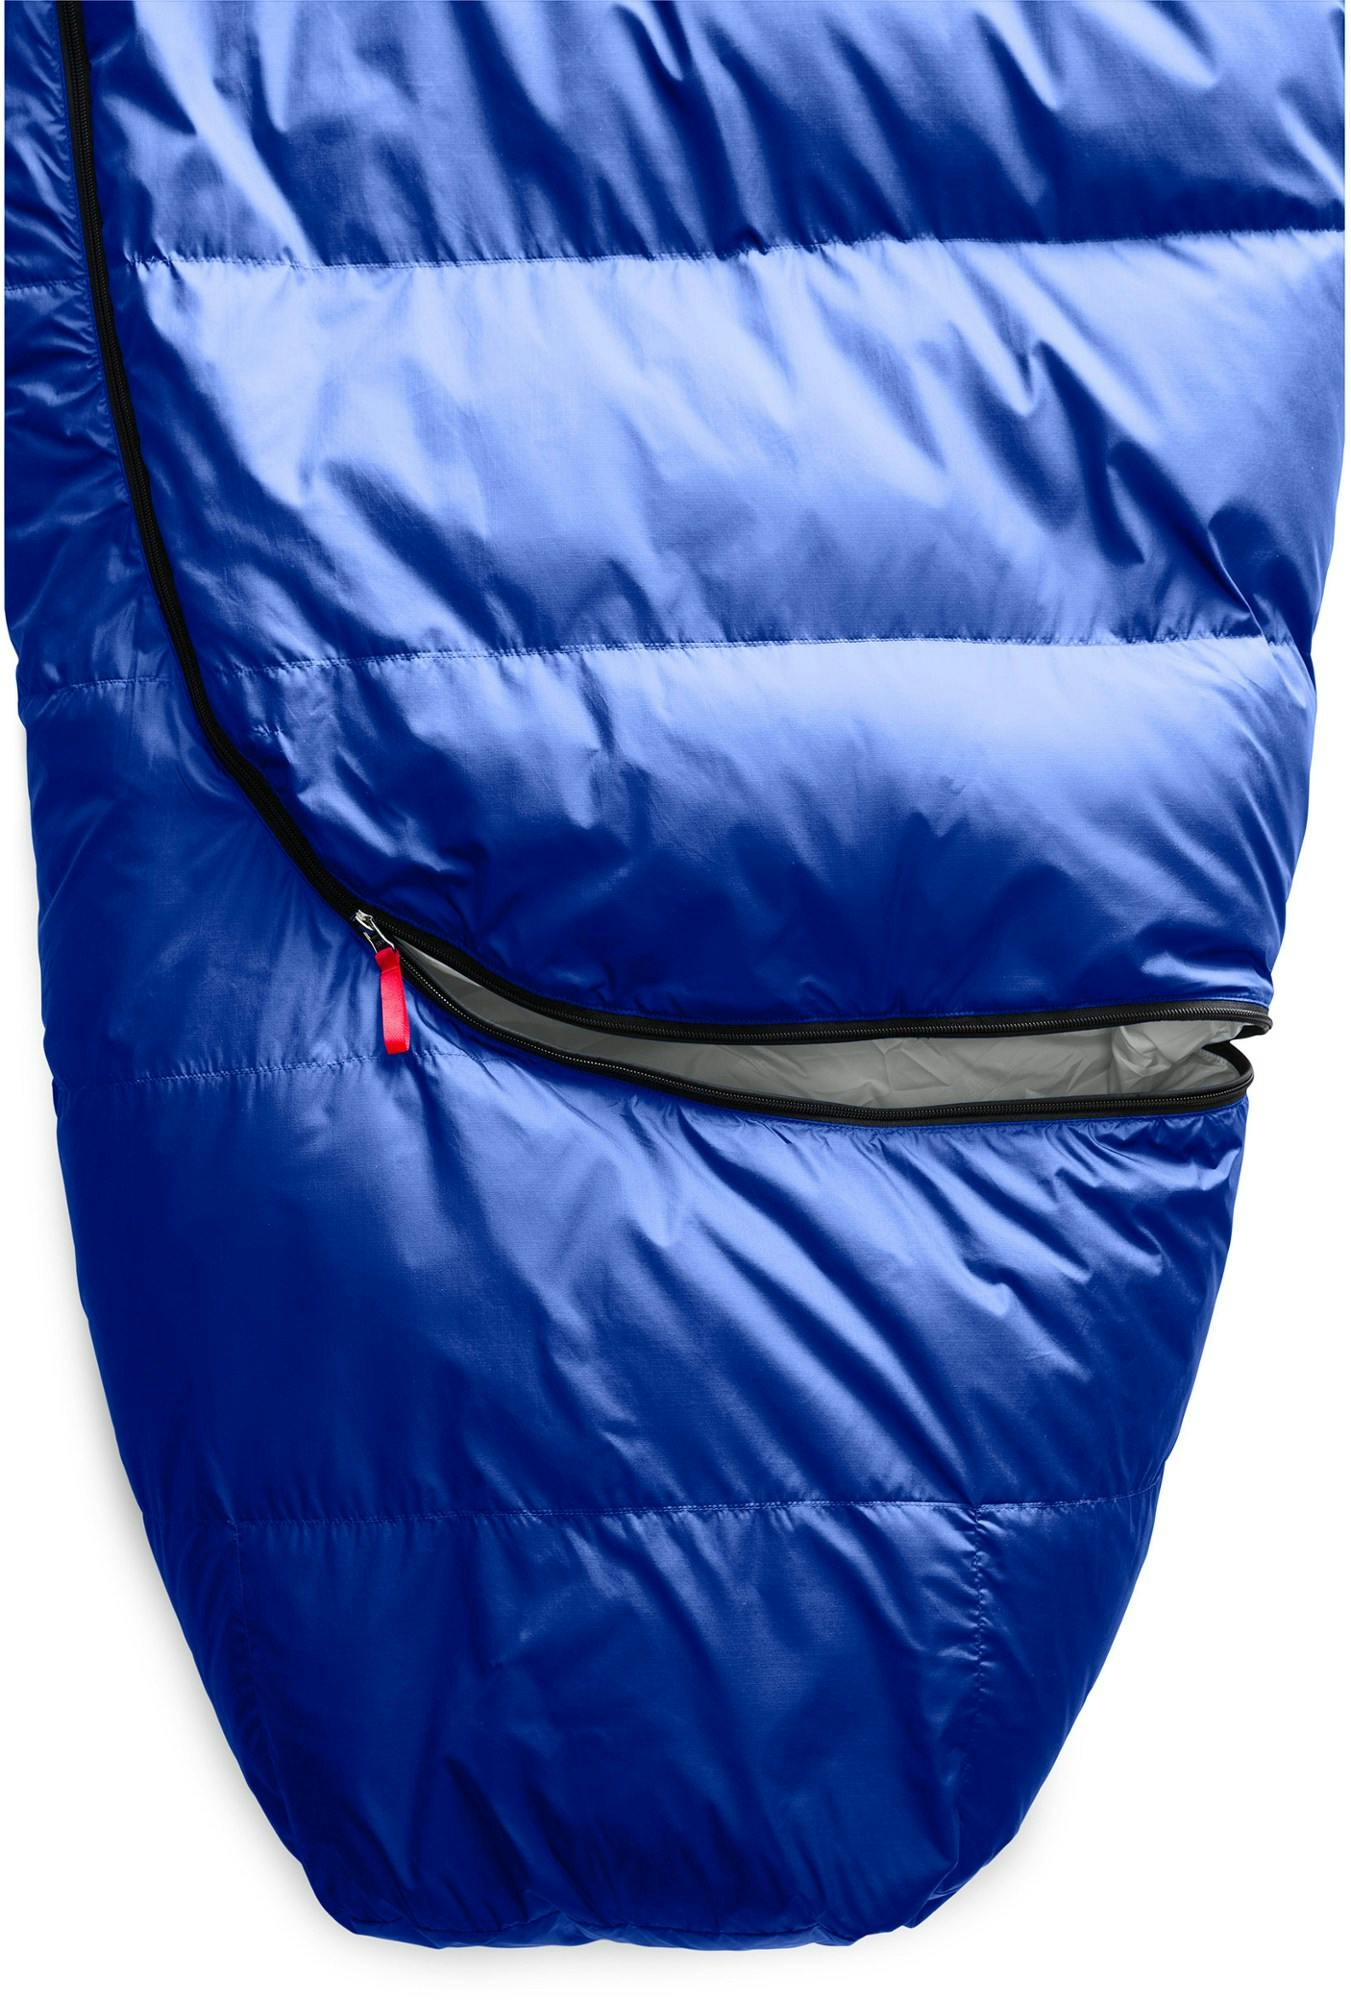 The North Face Eco Trail Down 20 Sleeping Bag - Men's